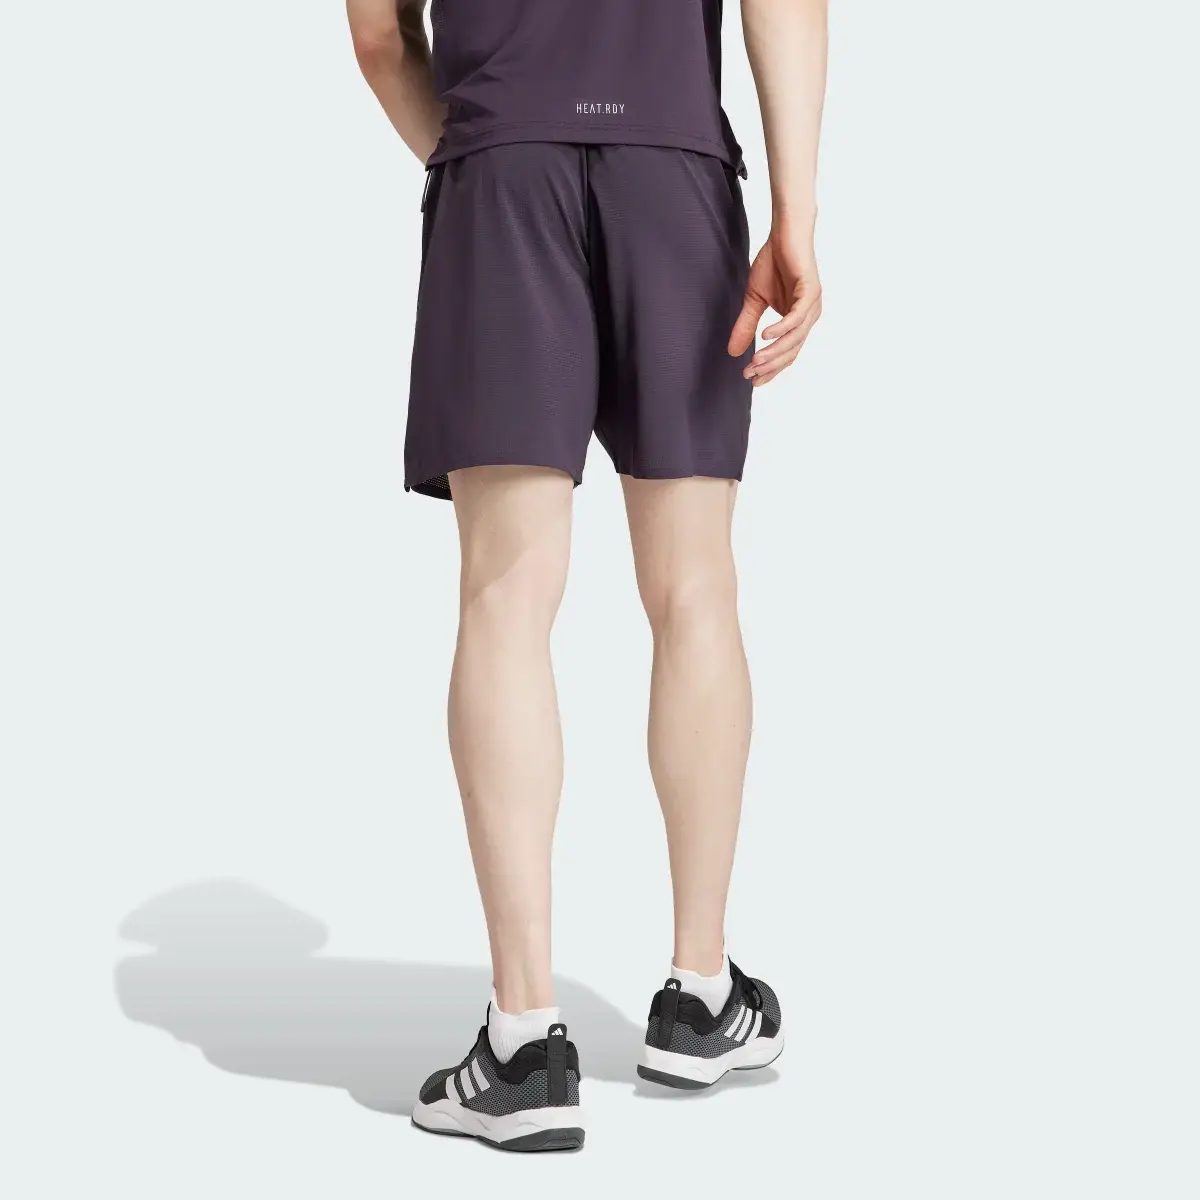 Adidas Short Designed for Training HIIT Workout HEAT.RDY. 2